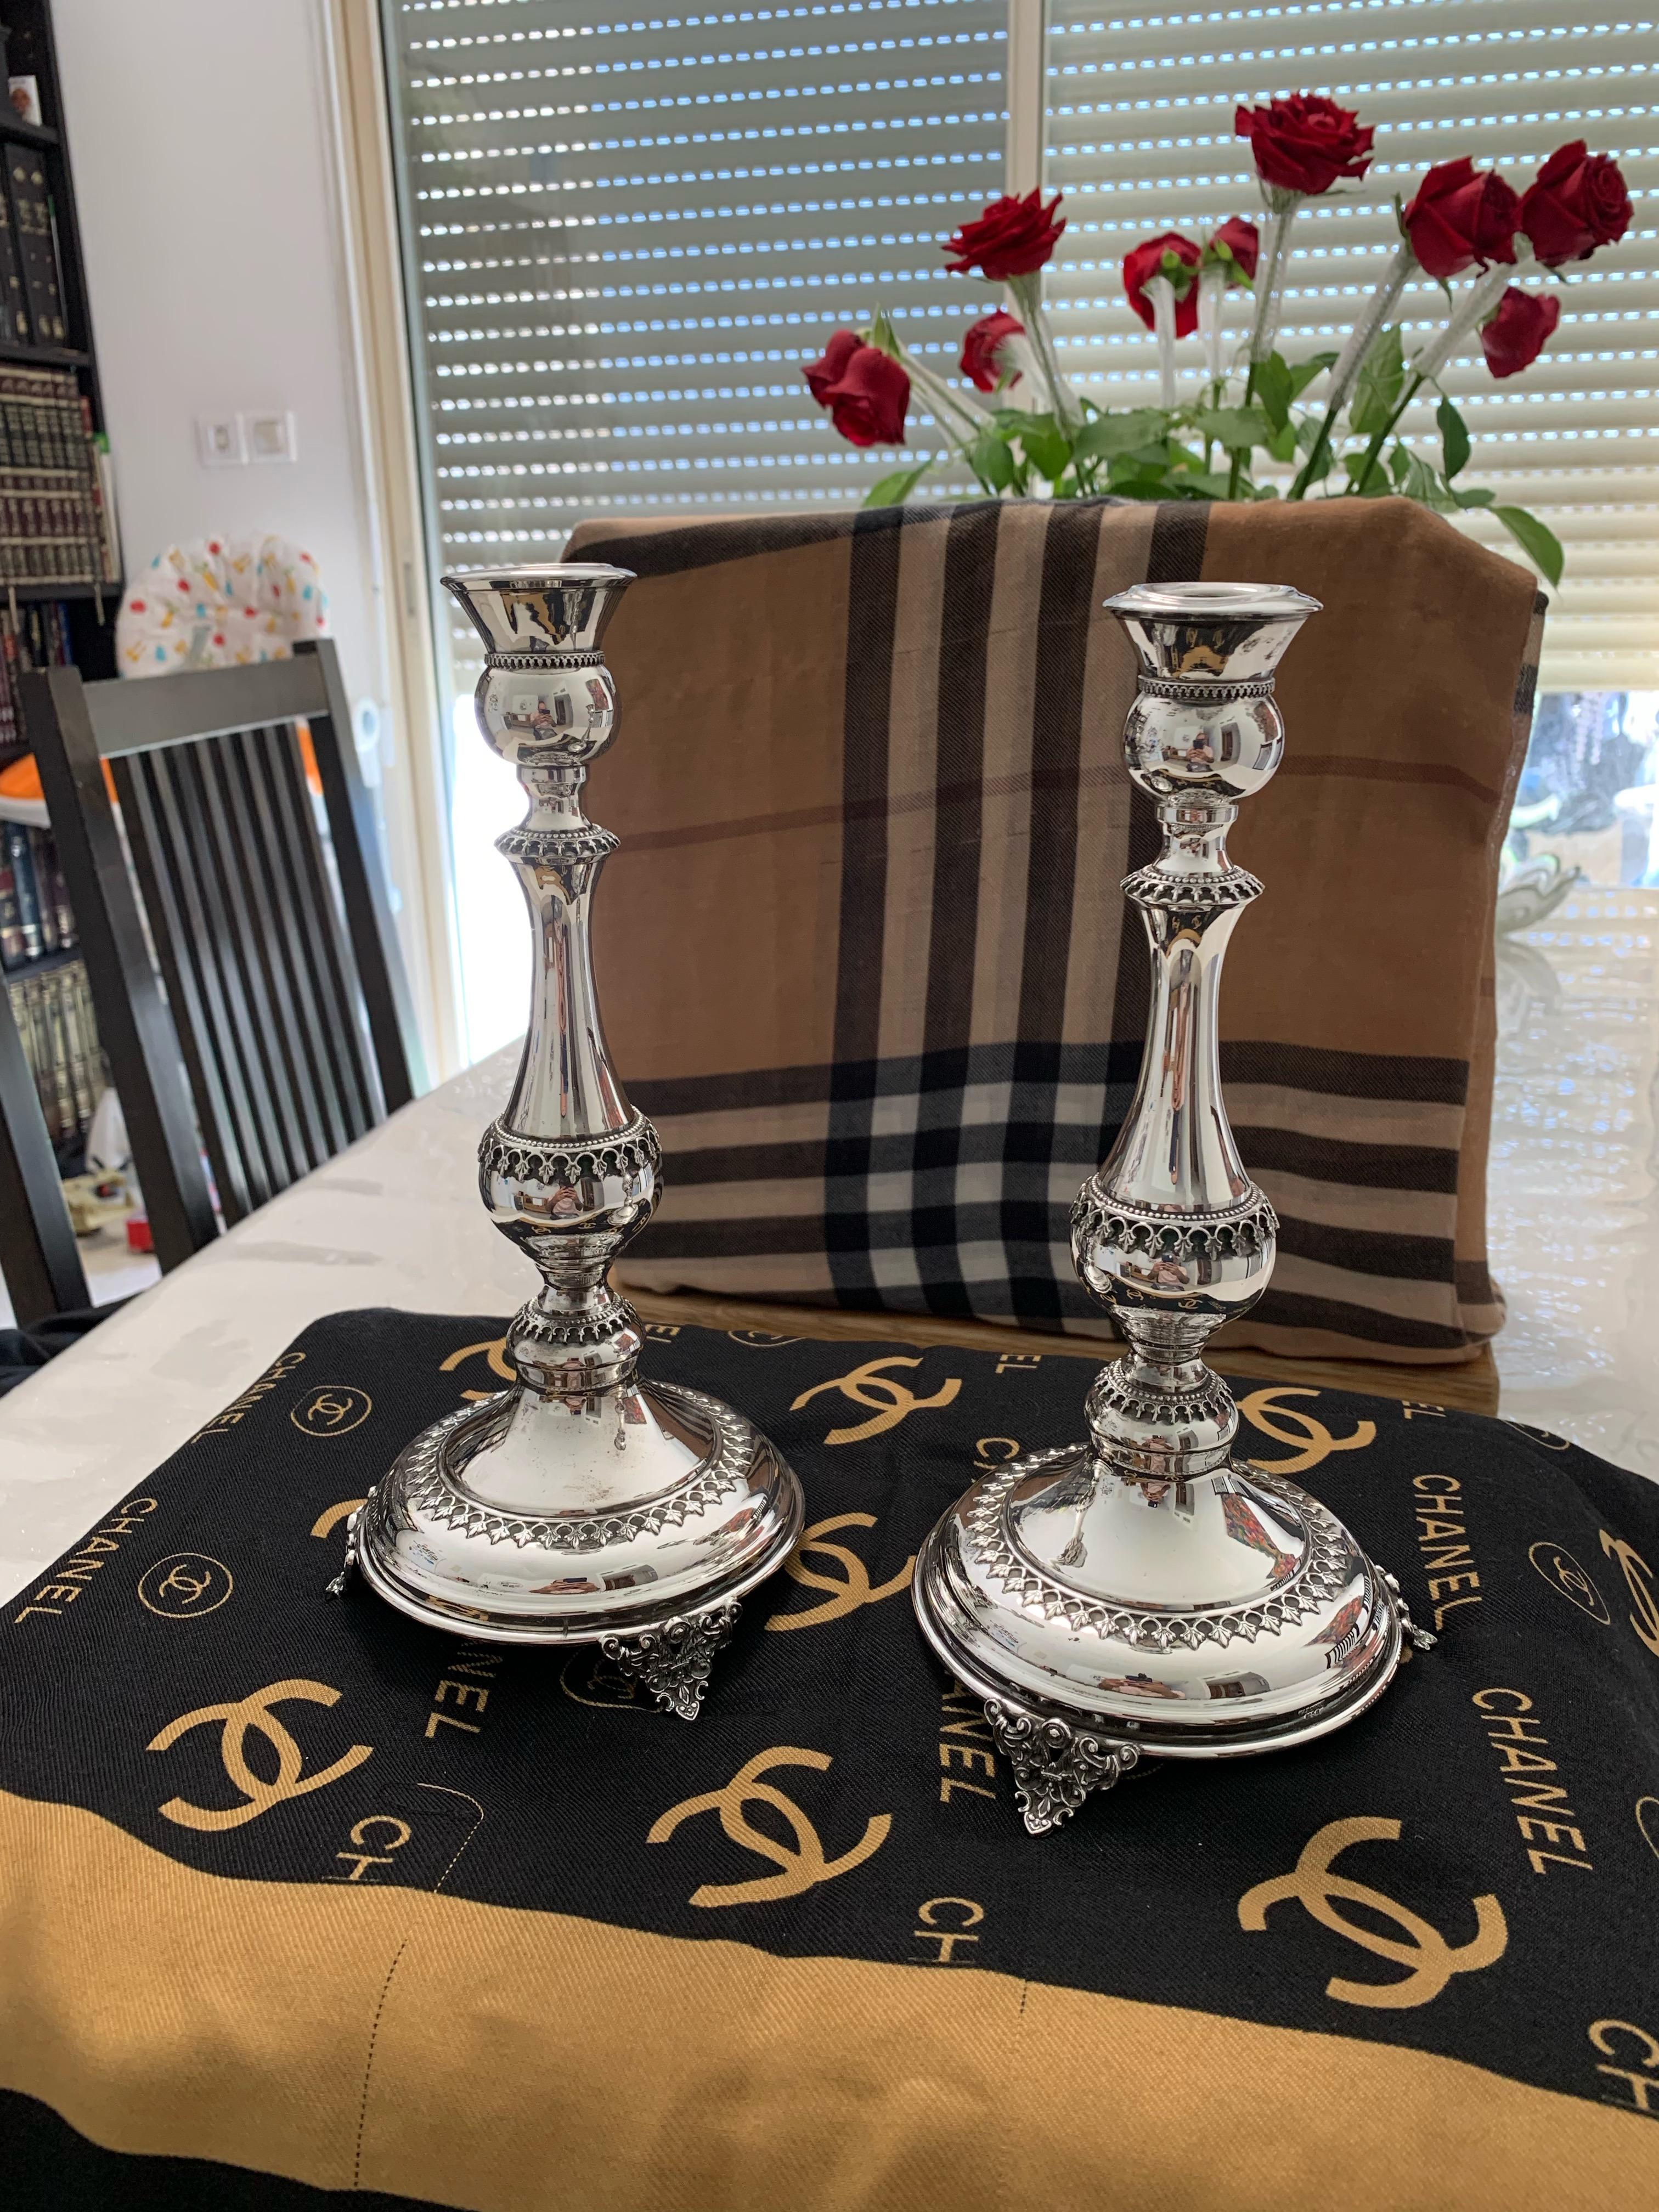 Beautifully Hand Crafted & Engraved Sterling Silver Candle Holders Made & Signed By “Hazorfim”.
Stamped 925, Hazorfim.
Large Size.
Very Well Made.
Nice & Heavy!